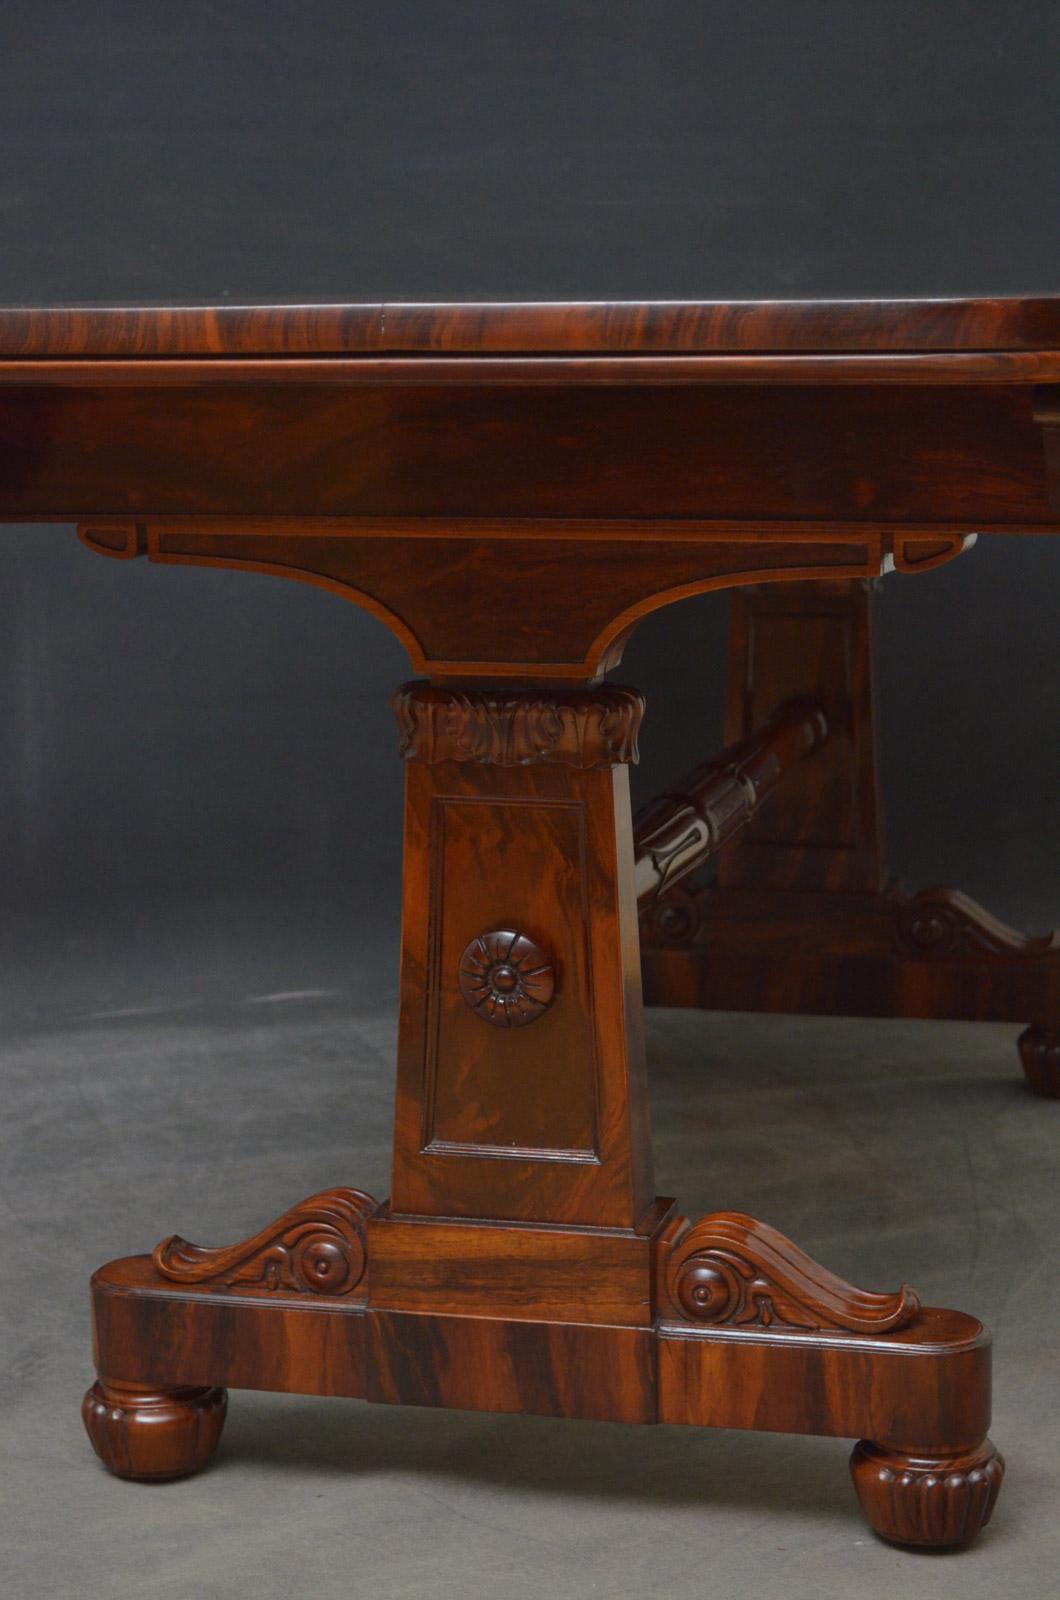 Exceptional Regency Goncalo Alves Library Table in the Manner of Gillows 5